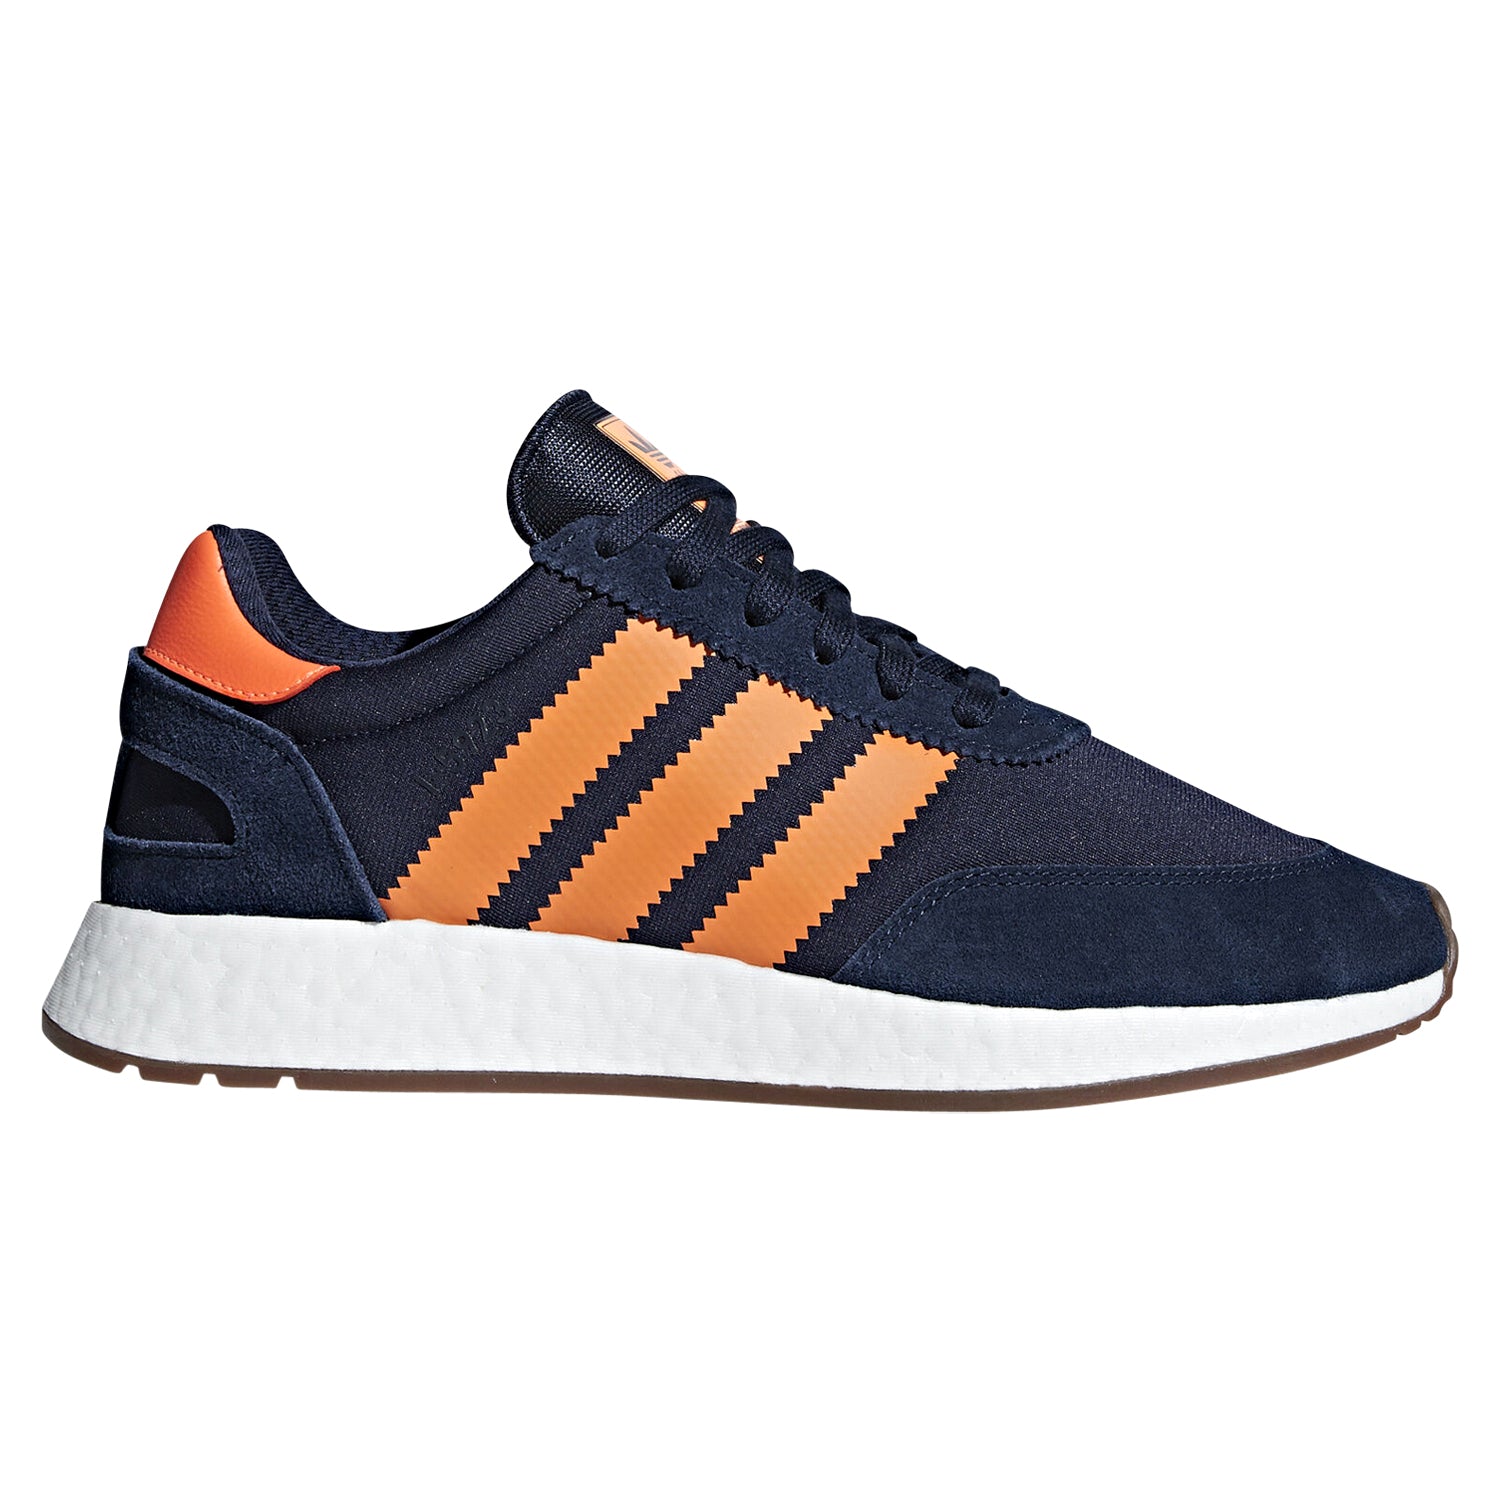 adidas classic running shoes